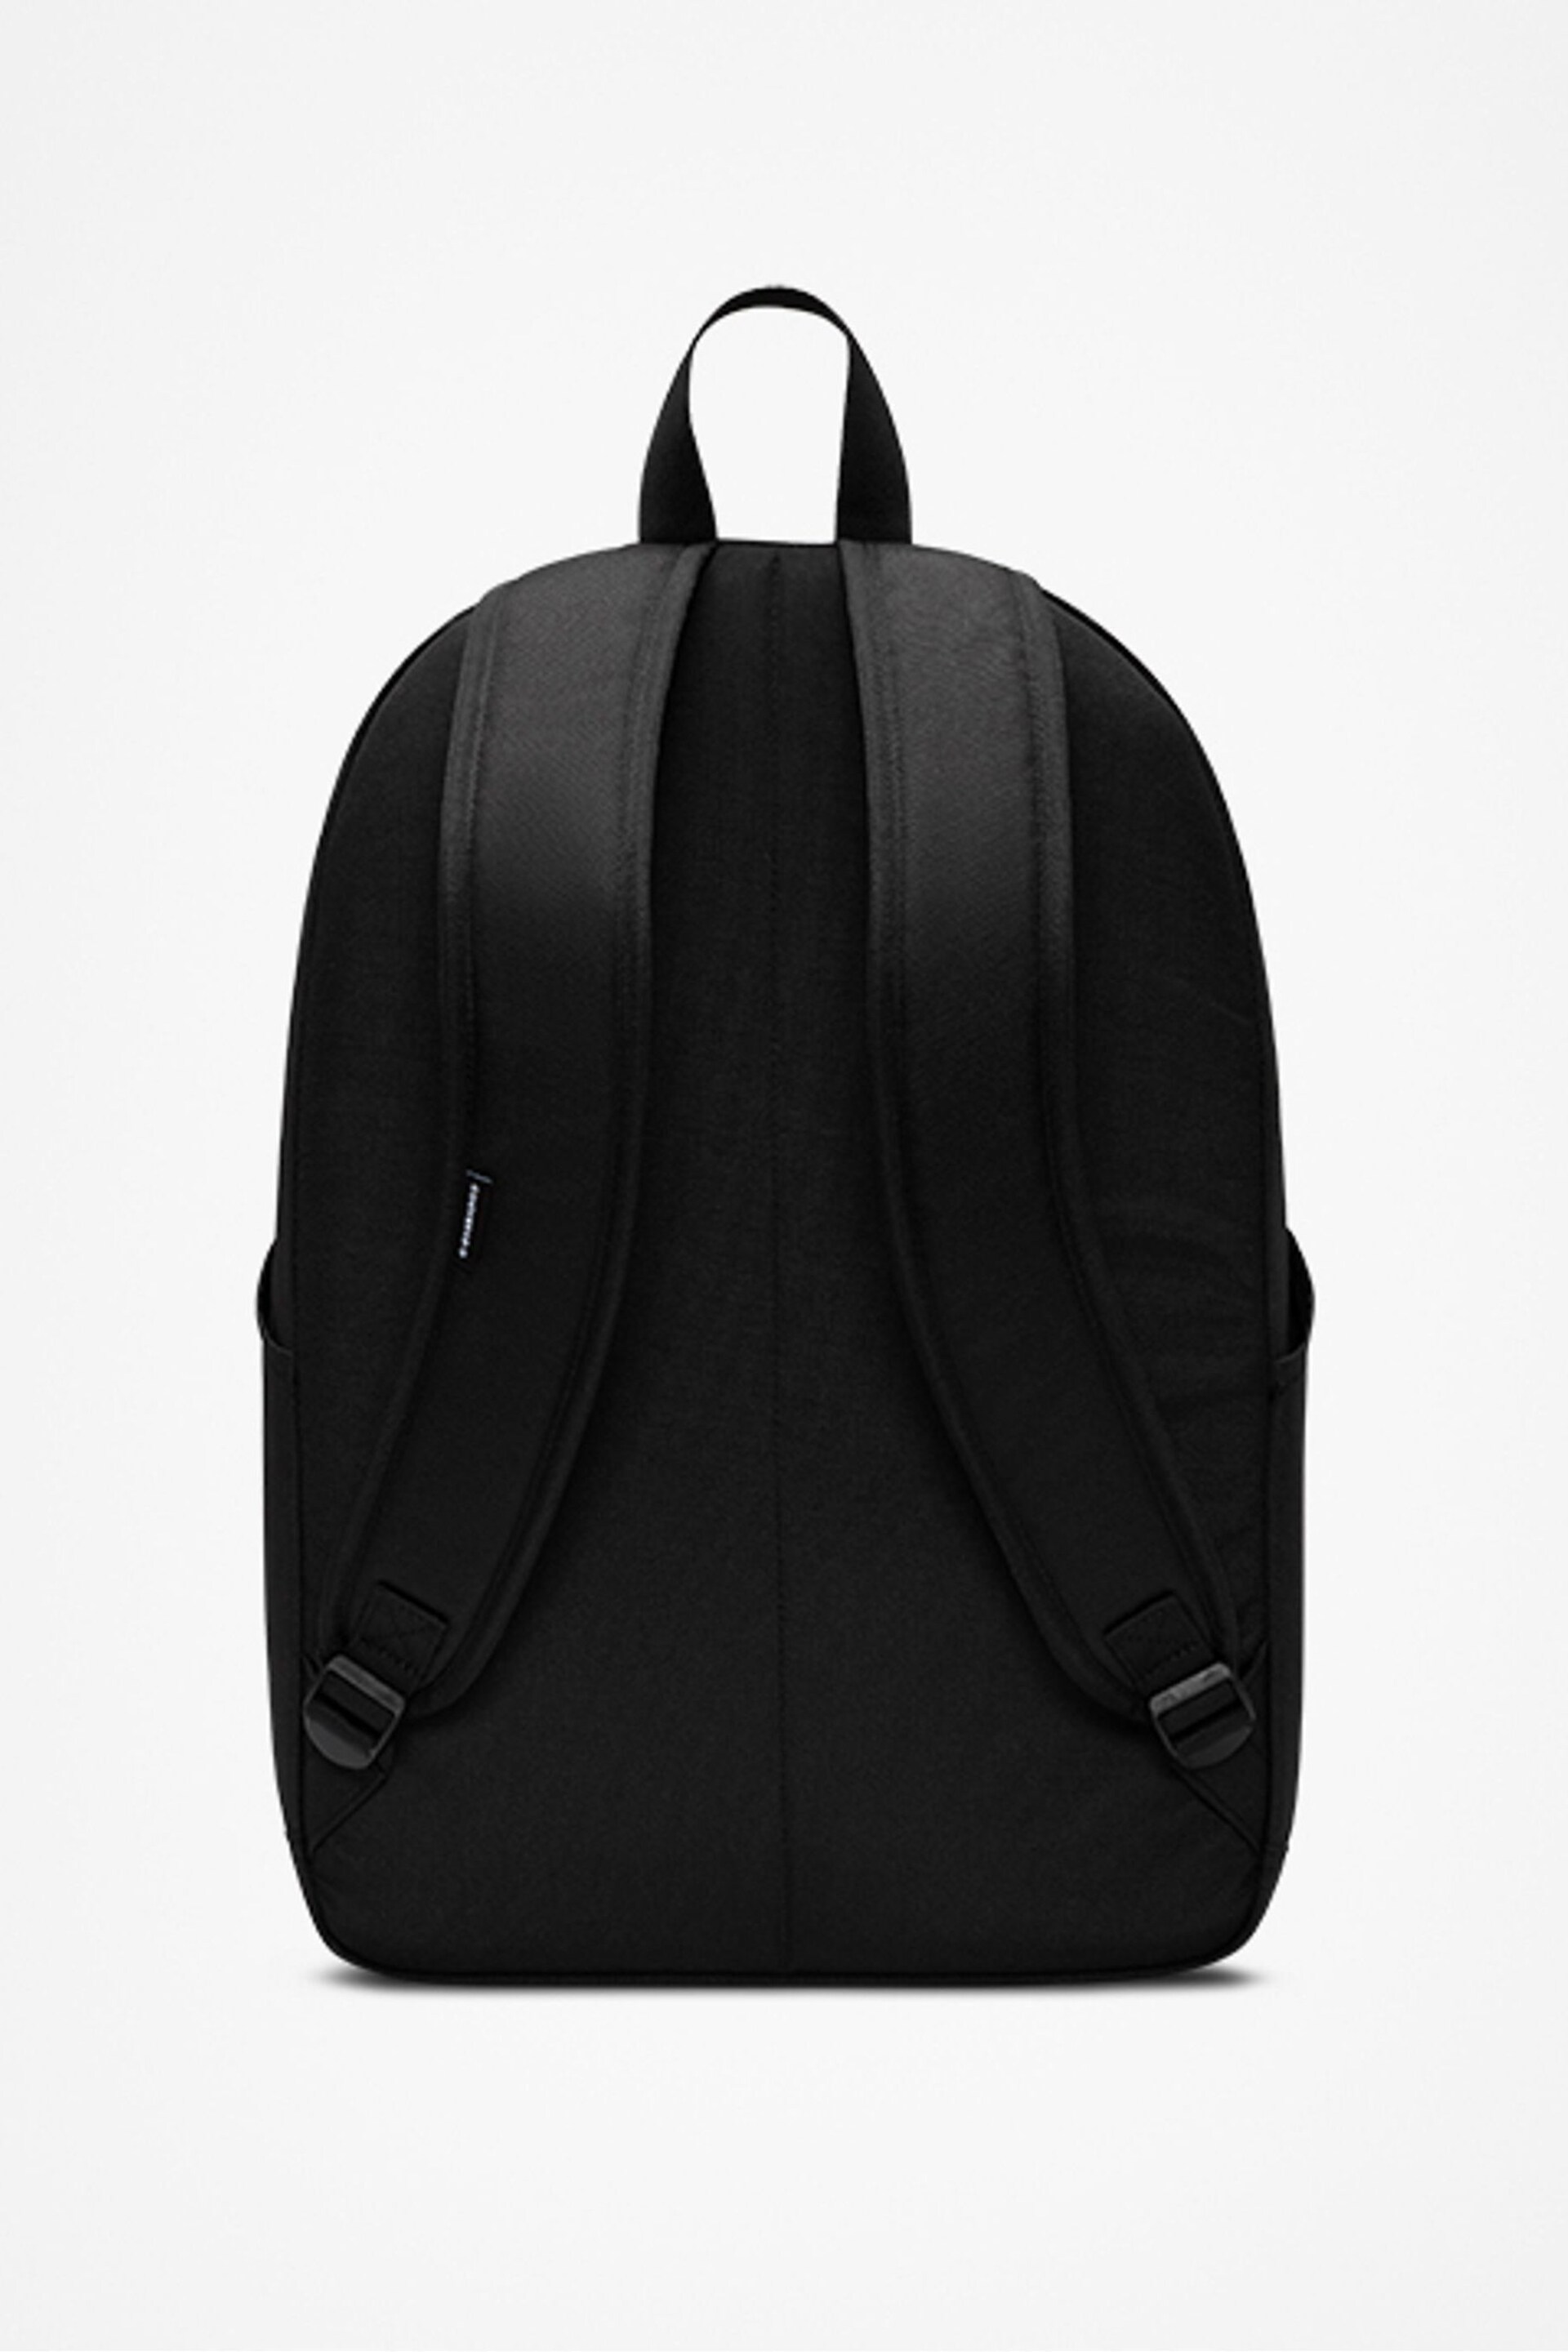 Converse Black Converse Black Go 2 Backpack - Image 2 of 7